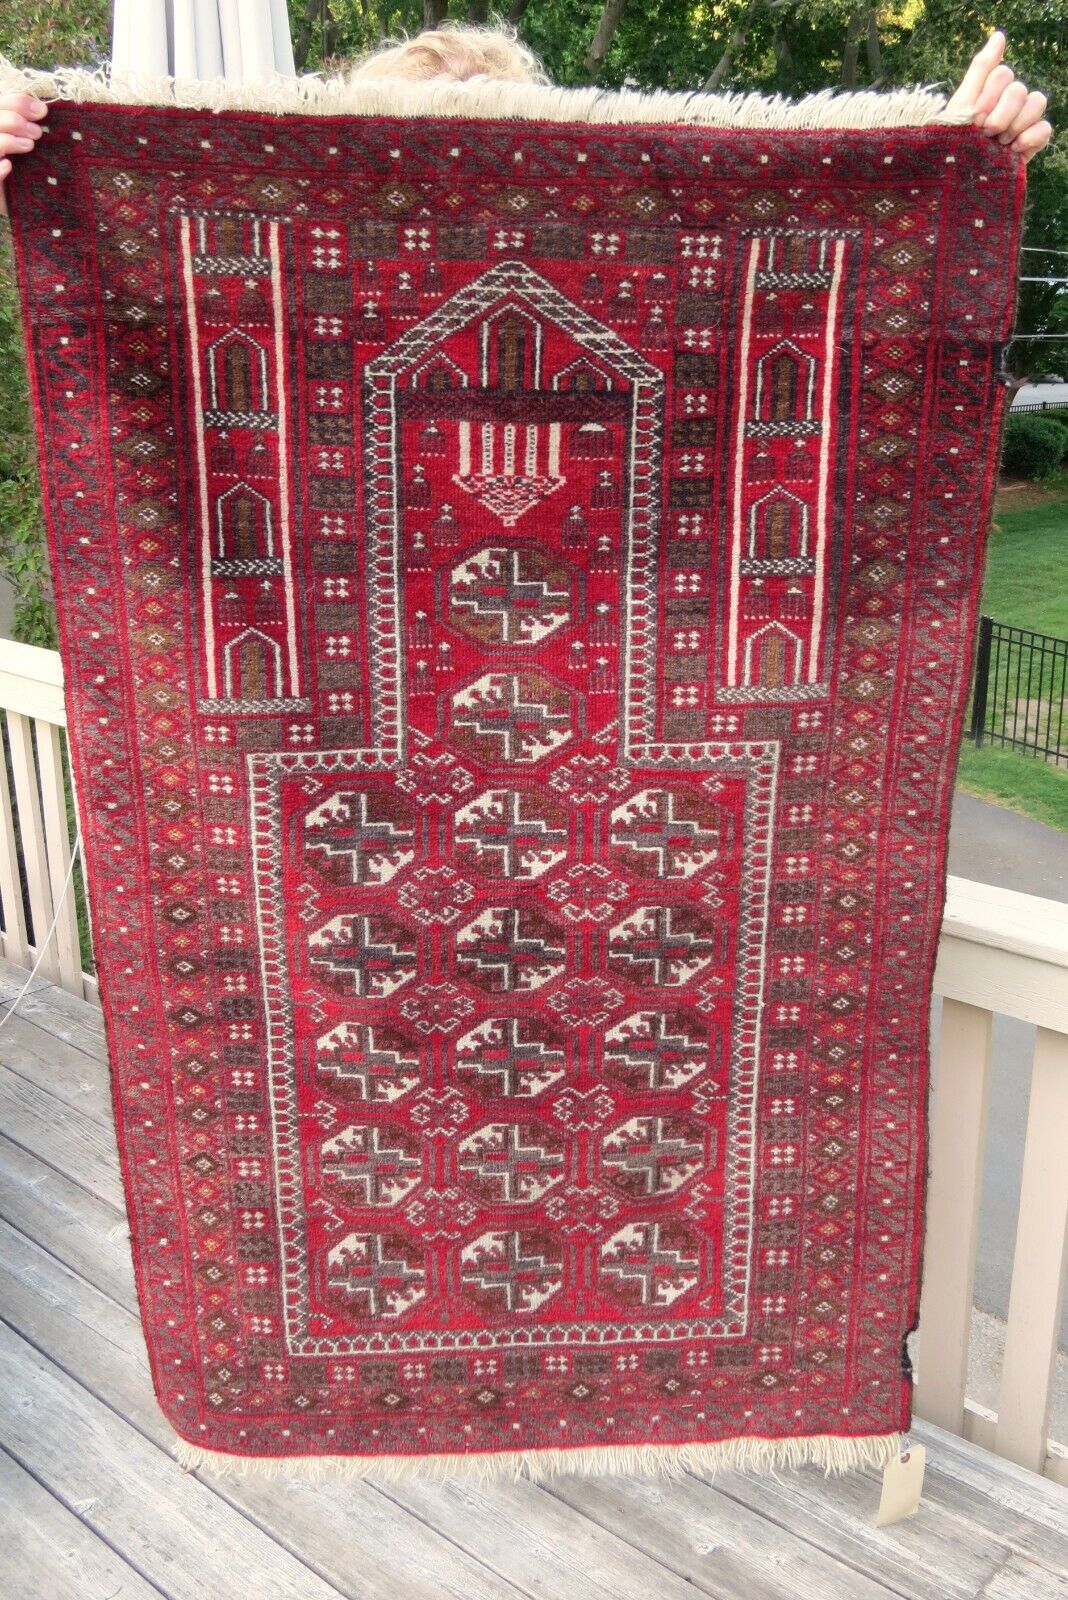 Oriental Bokhara Pattern Carpet, Wool, Handwoven, Fine Composition and Colors